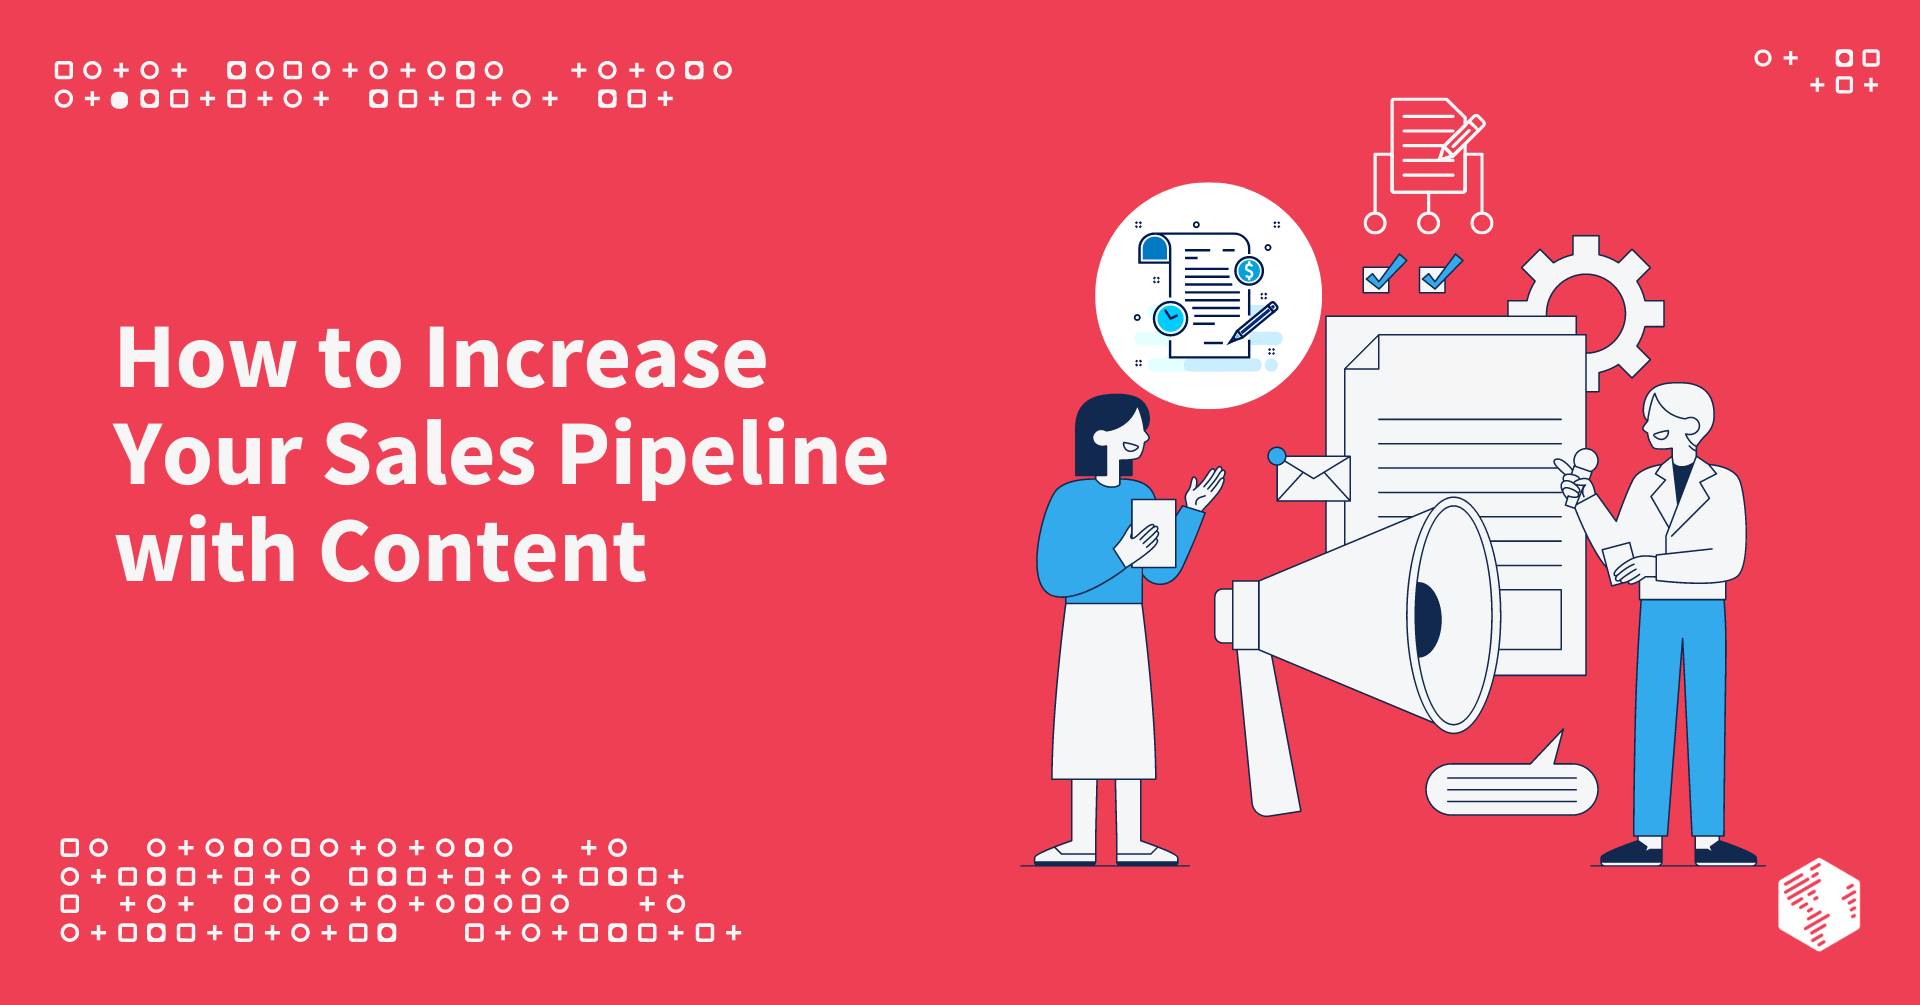 How to increase your sales pipeline with content - featured image